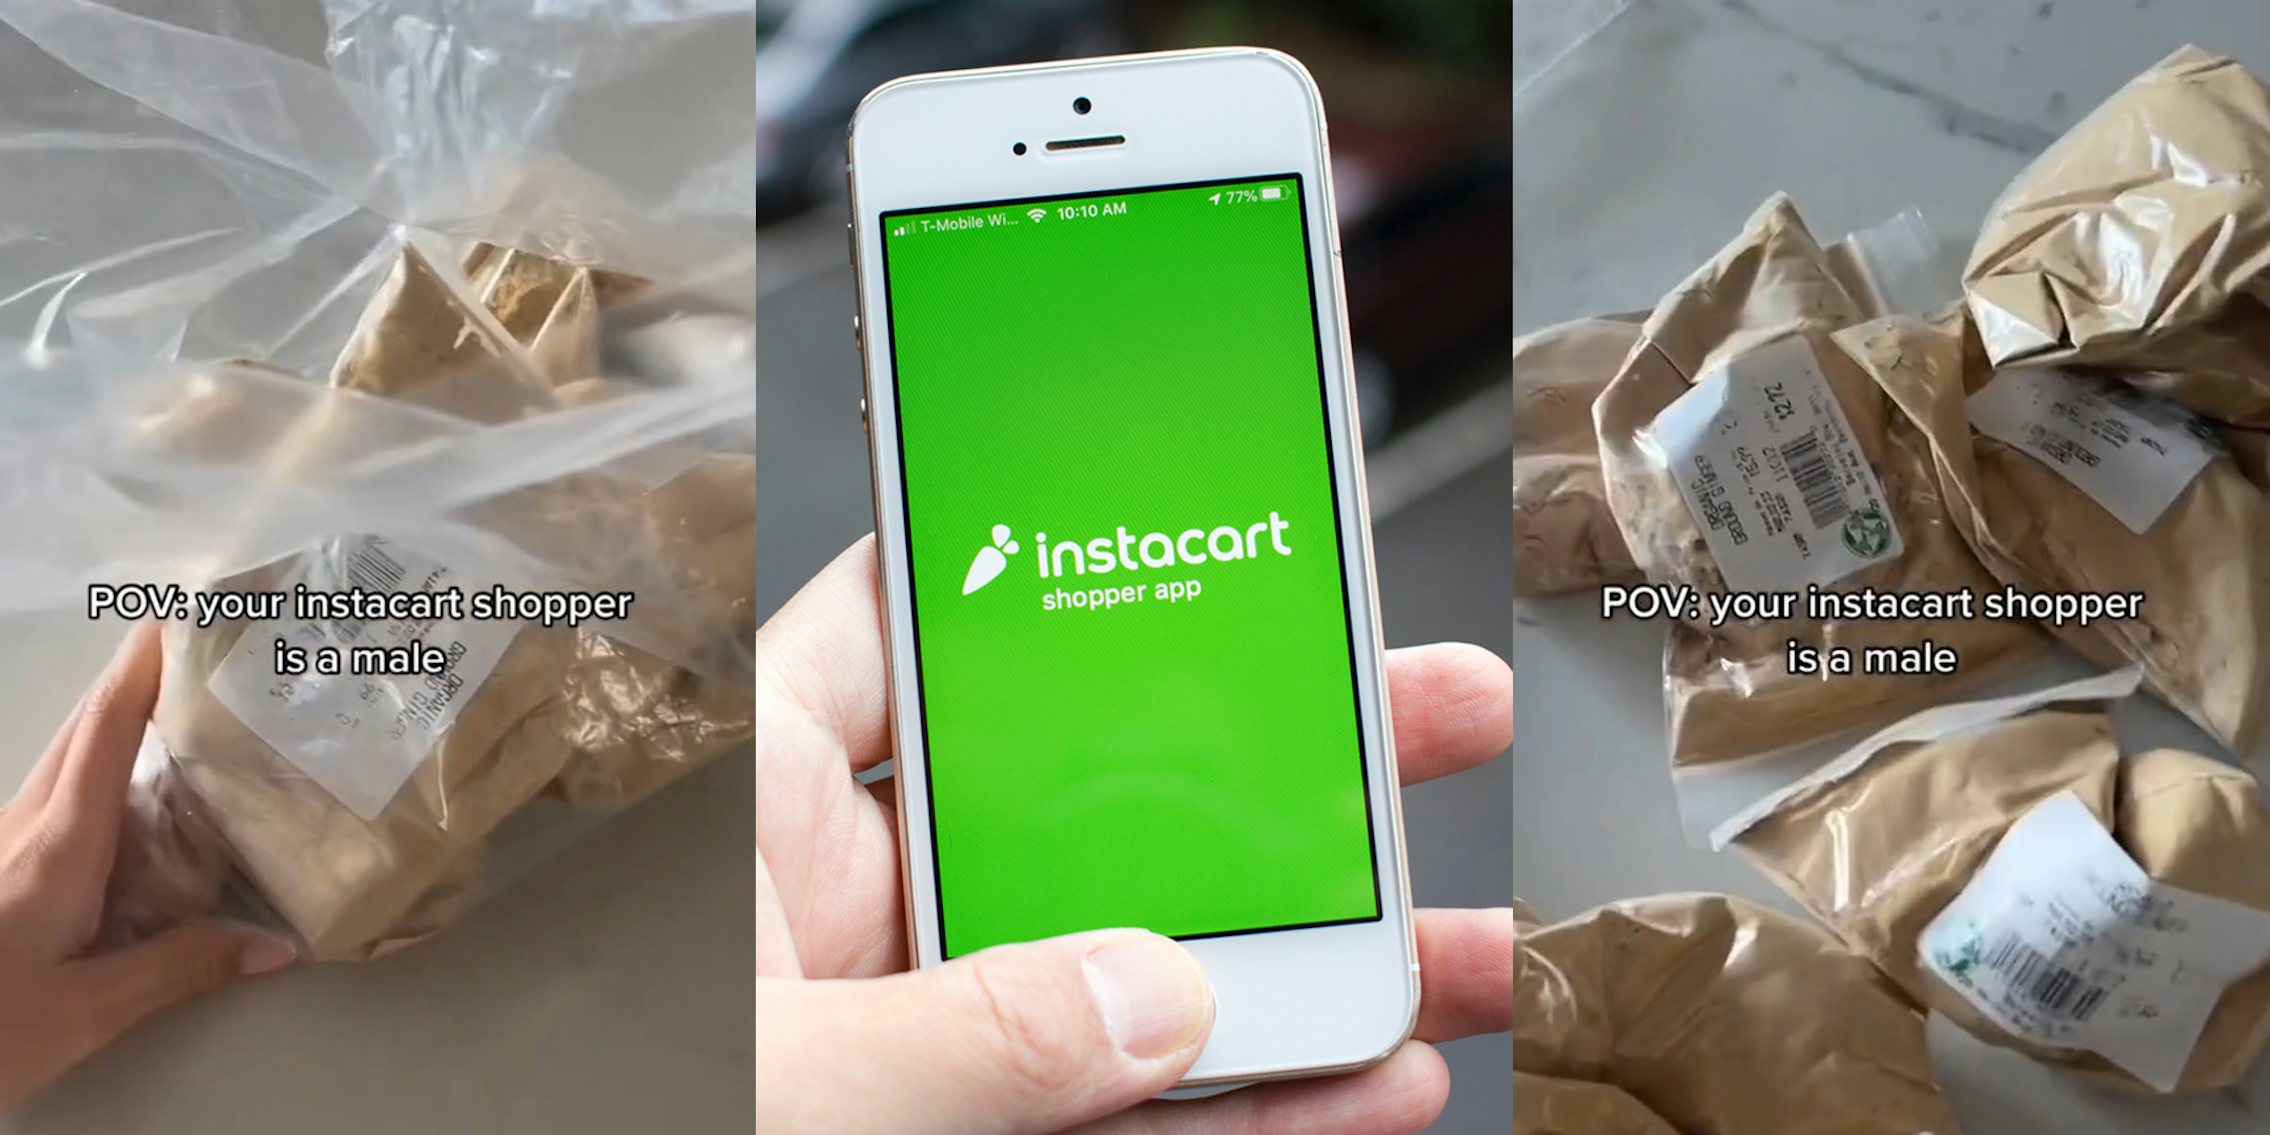 hand on bag on counter with caption 'POV: your instacart shopper is a male' (l) Instacart shopper app on phone in hand in parking lot (c) bags of ground ginger on table with caption 'POV: your instacart shopper is a male' (r)